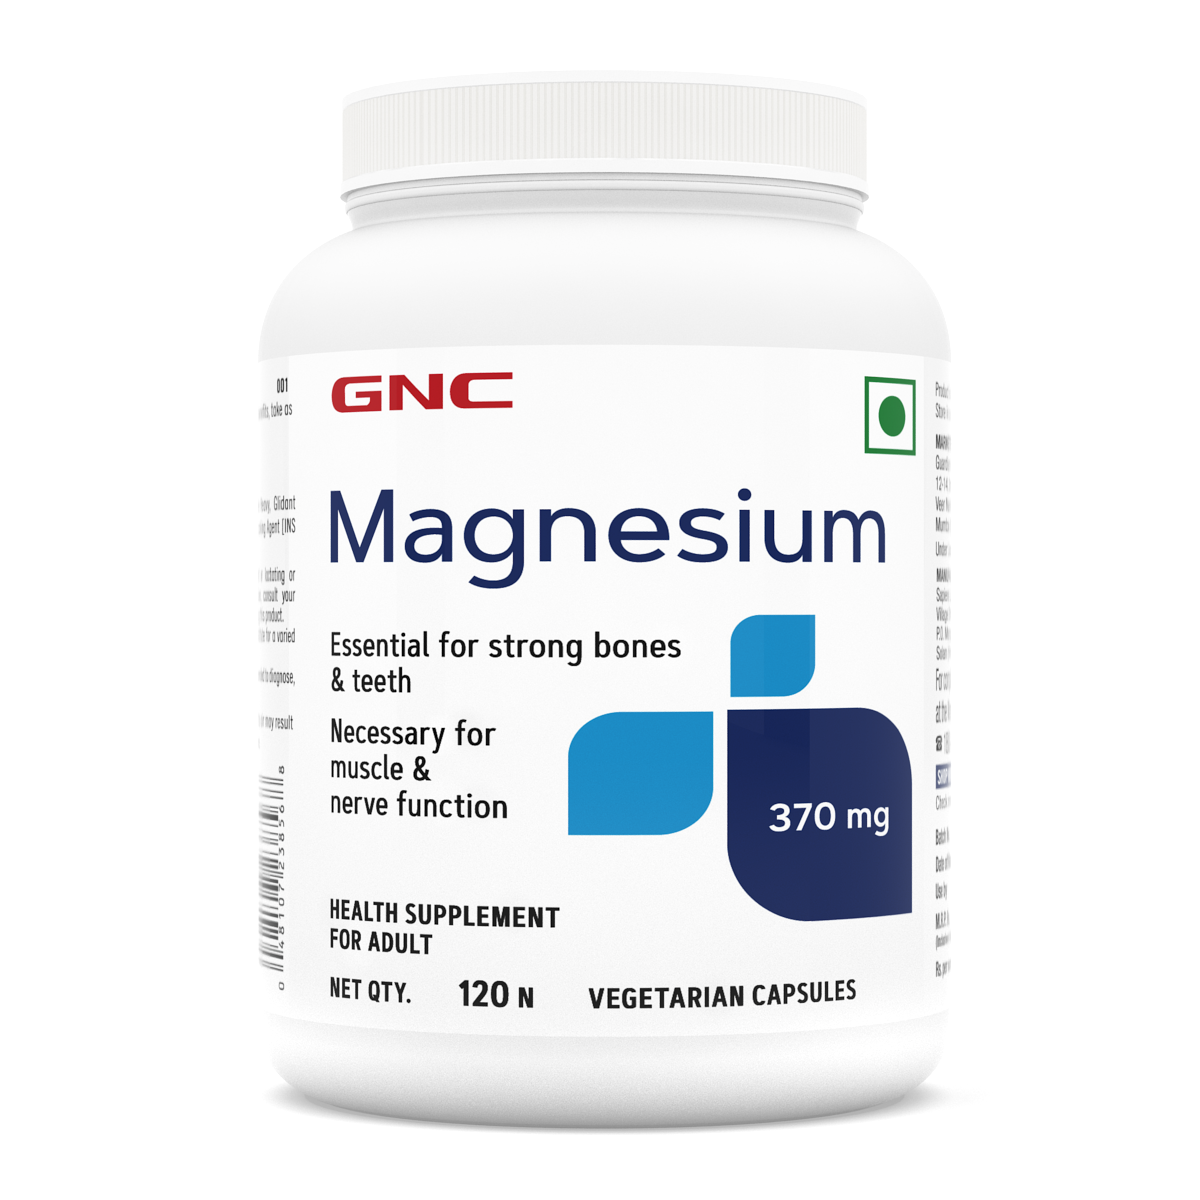 GNC Magnesium - 370mg - Magic Mineral for Healthy Bones, Muscle & Nerve Functions